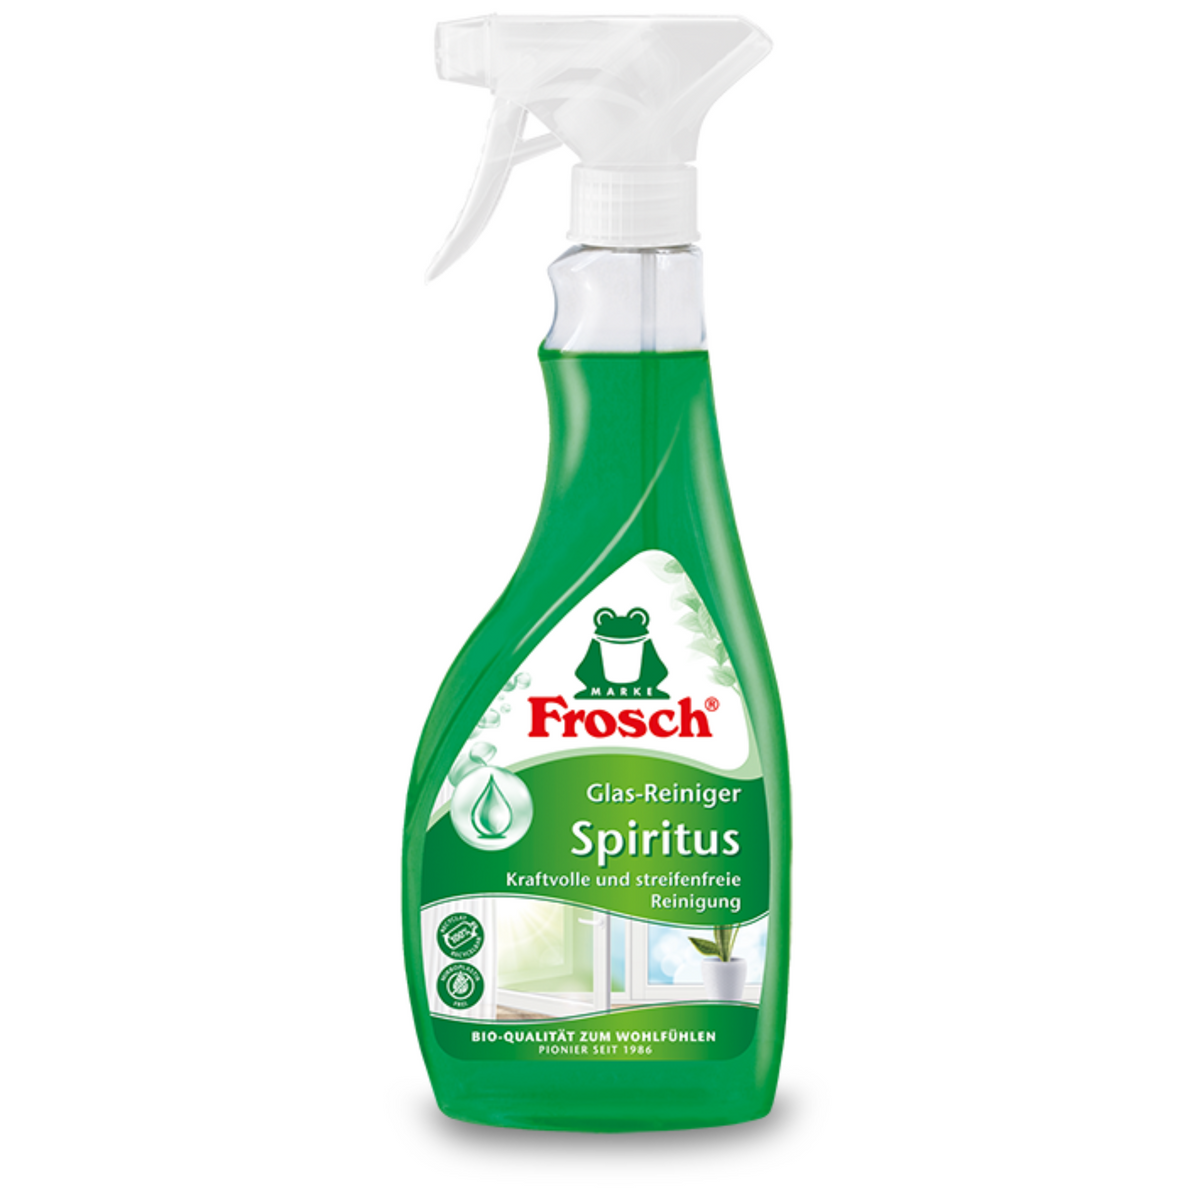 Primary Image of Frosch Glass Cleaning (Spiritus) Spray (500 ml)